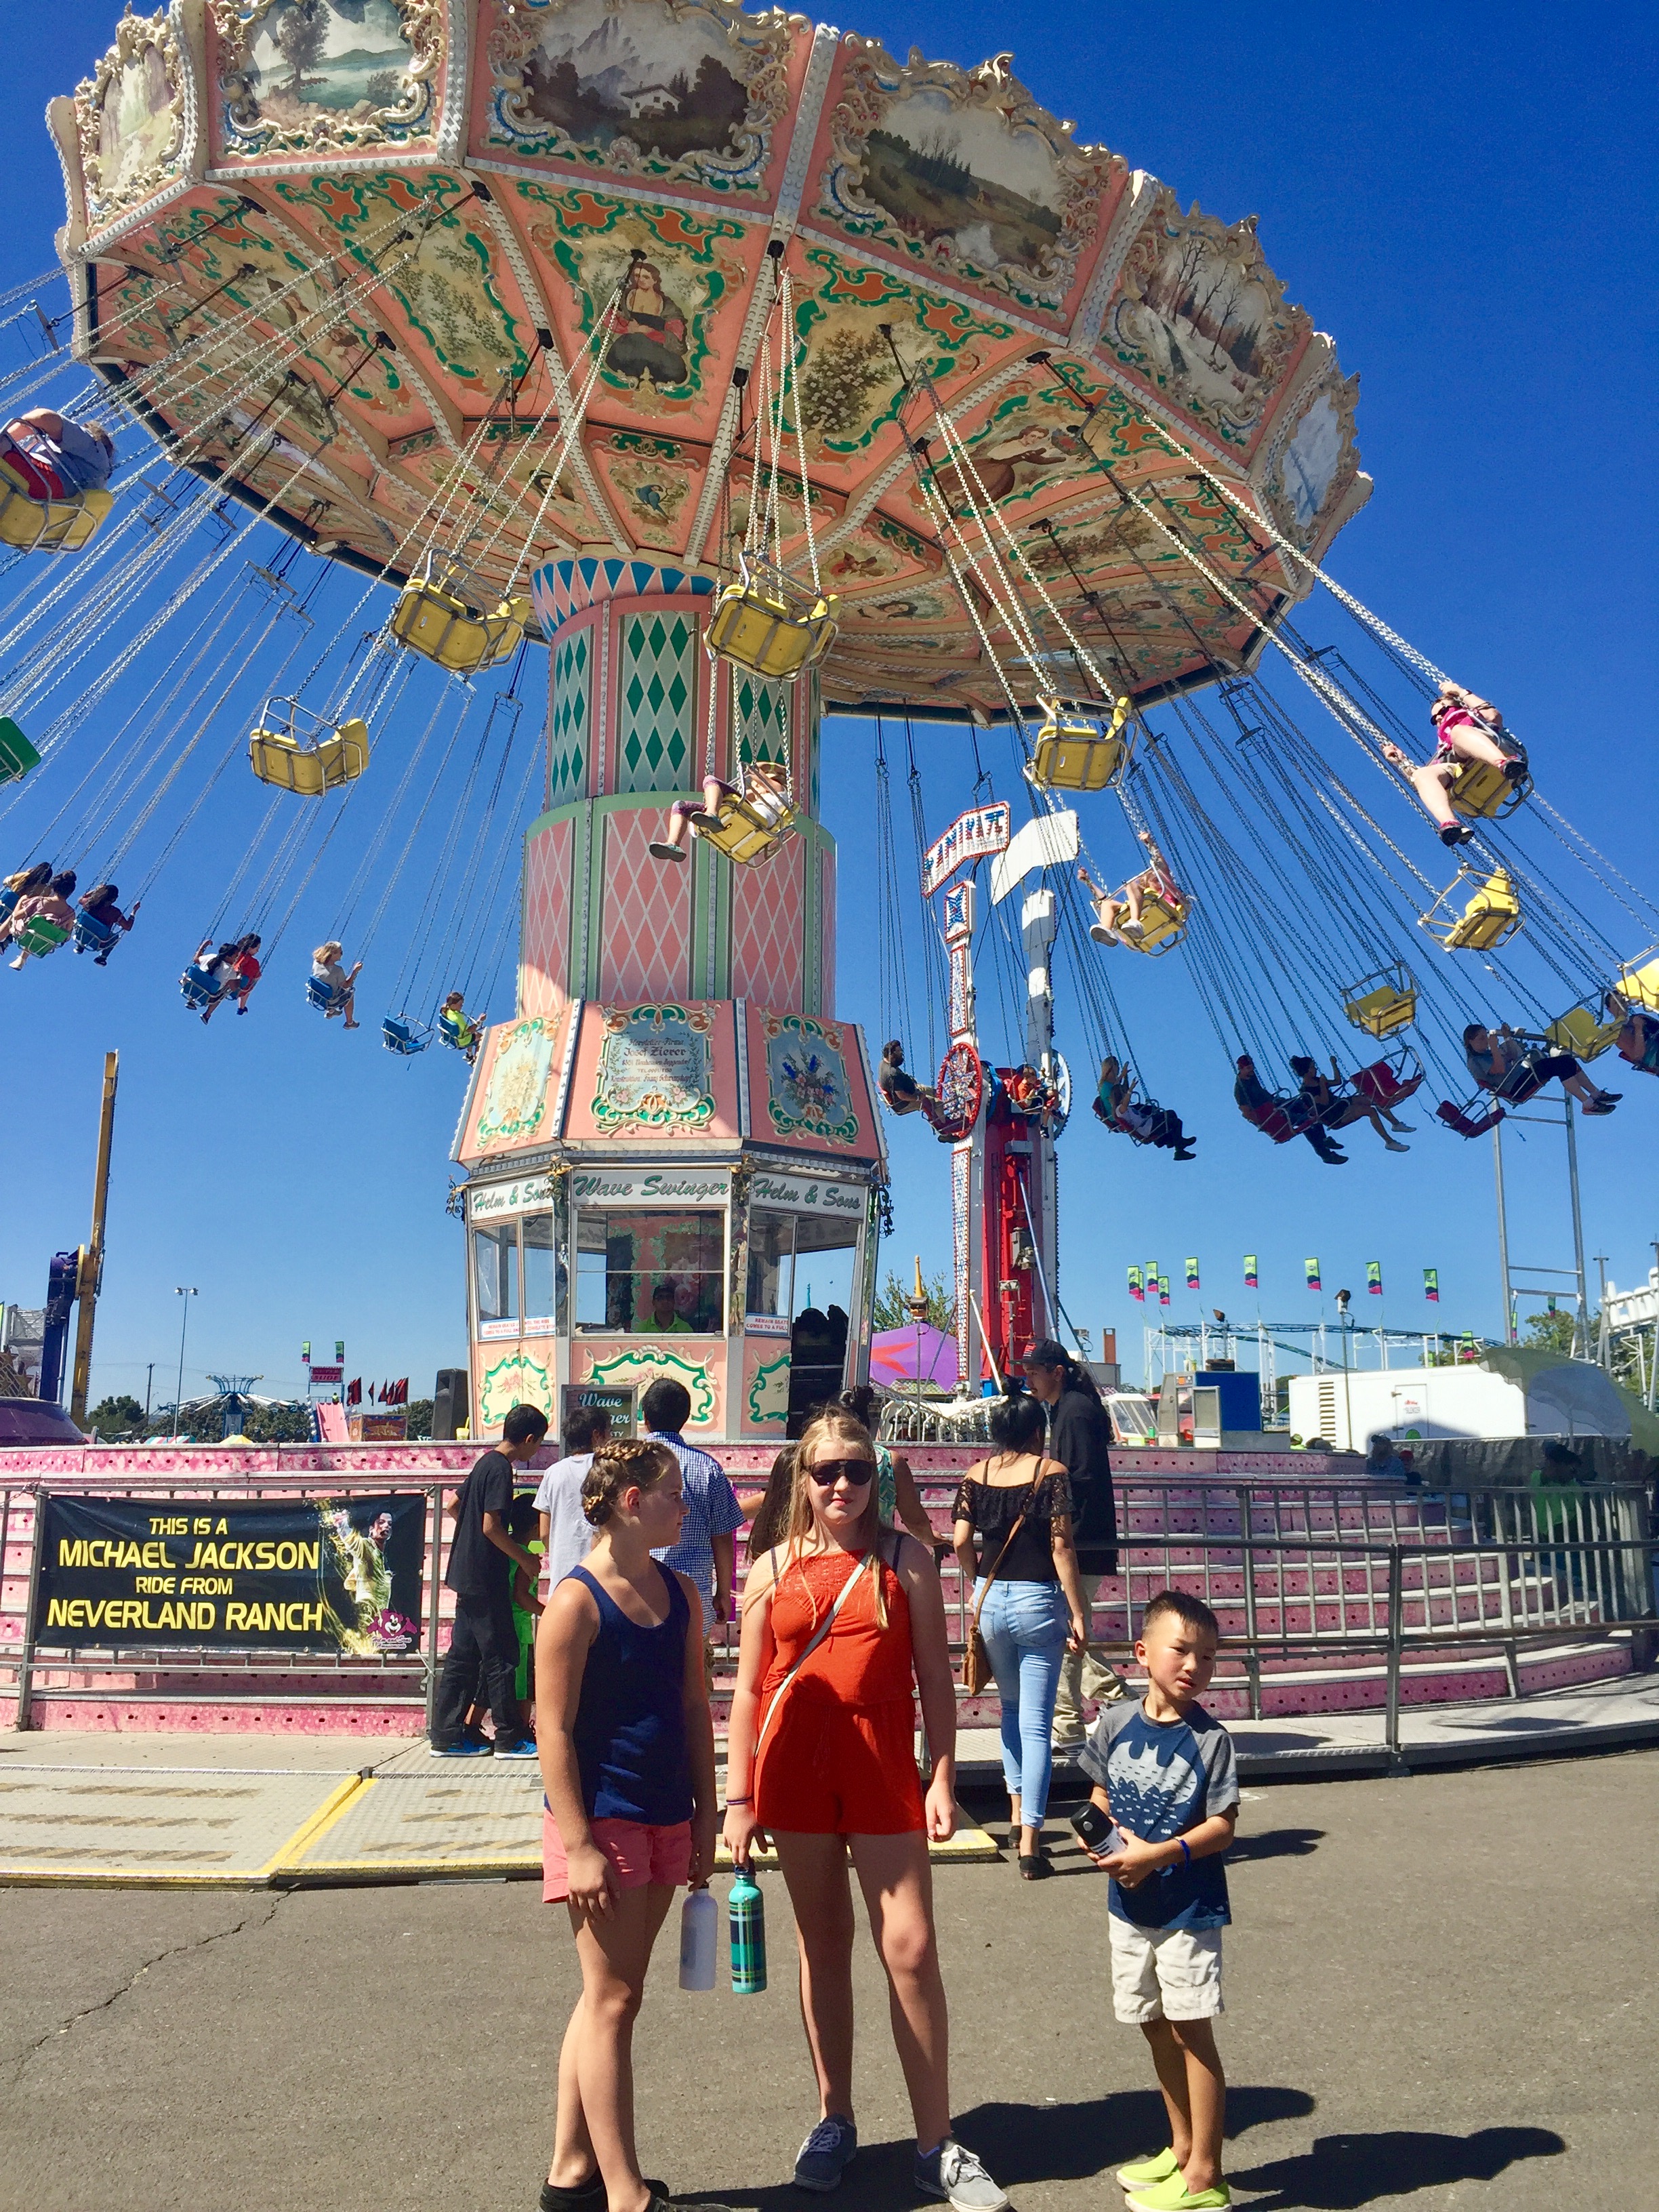 Rediscovering Oregon: The State Fair